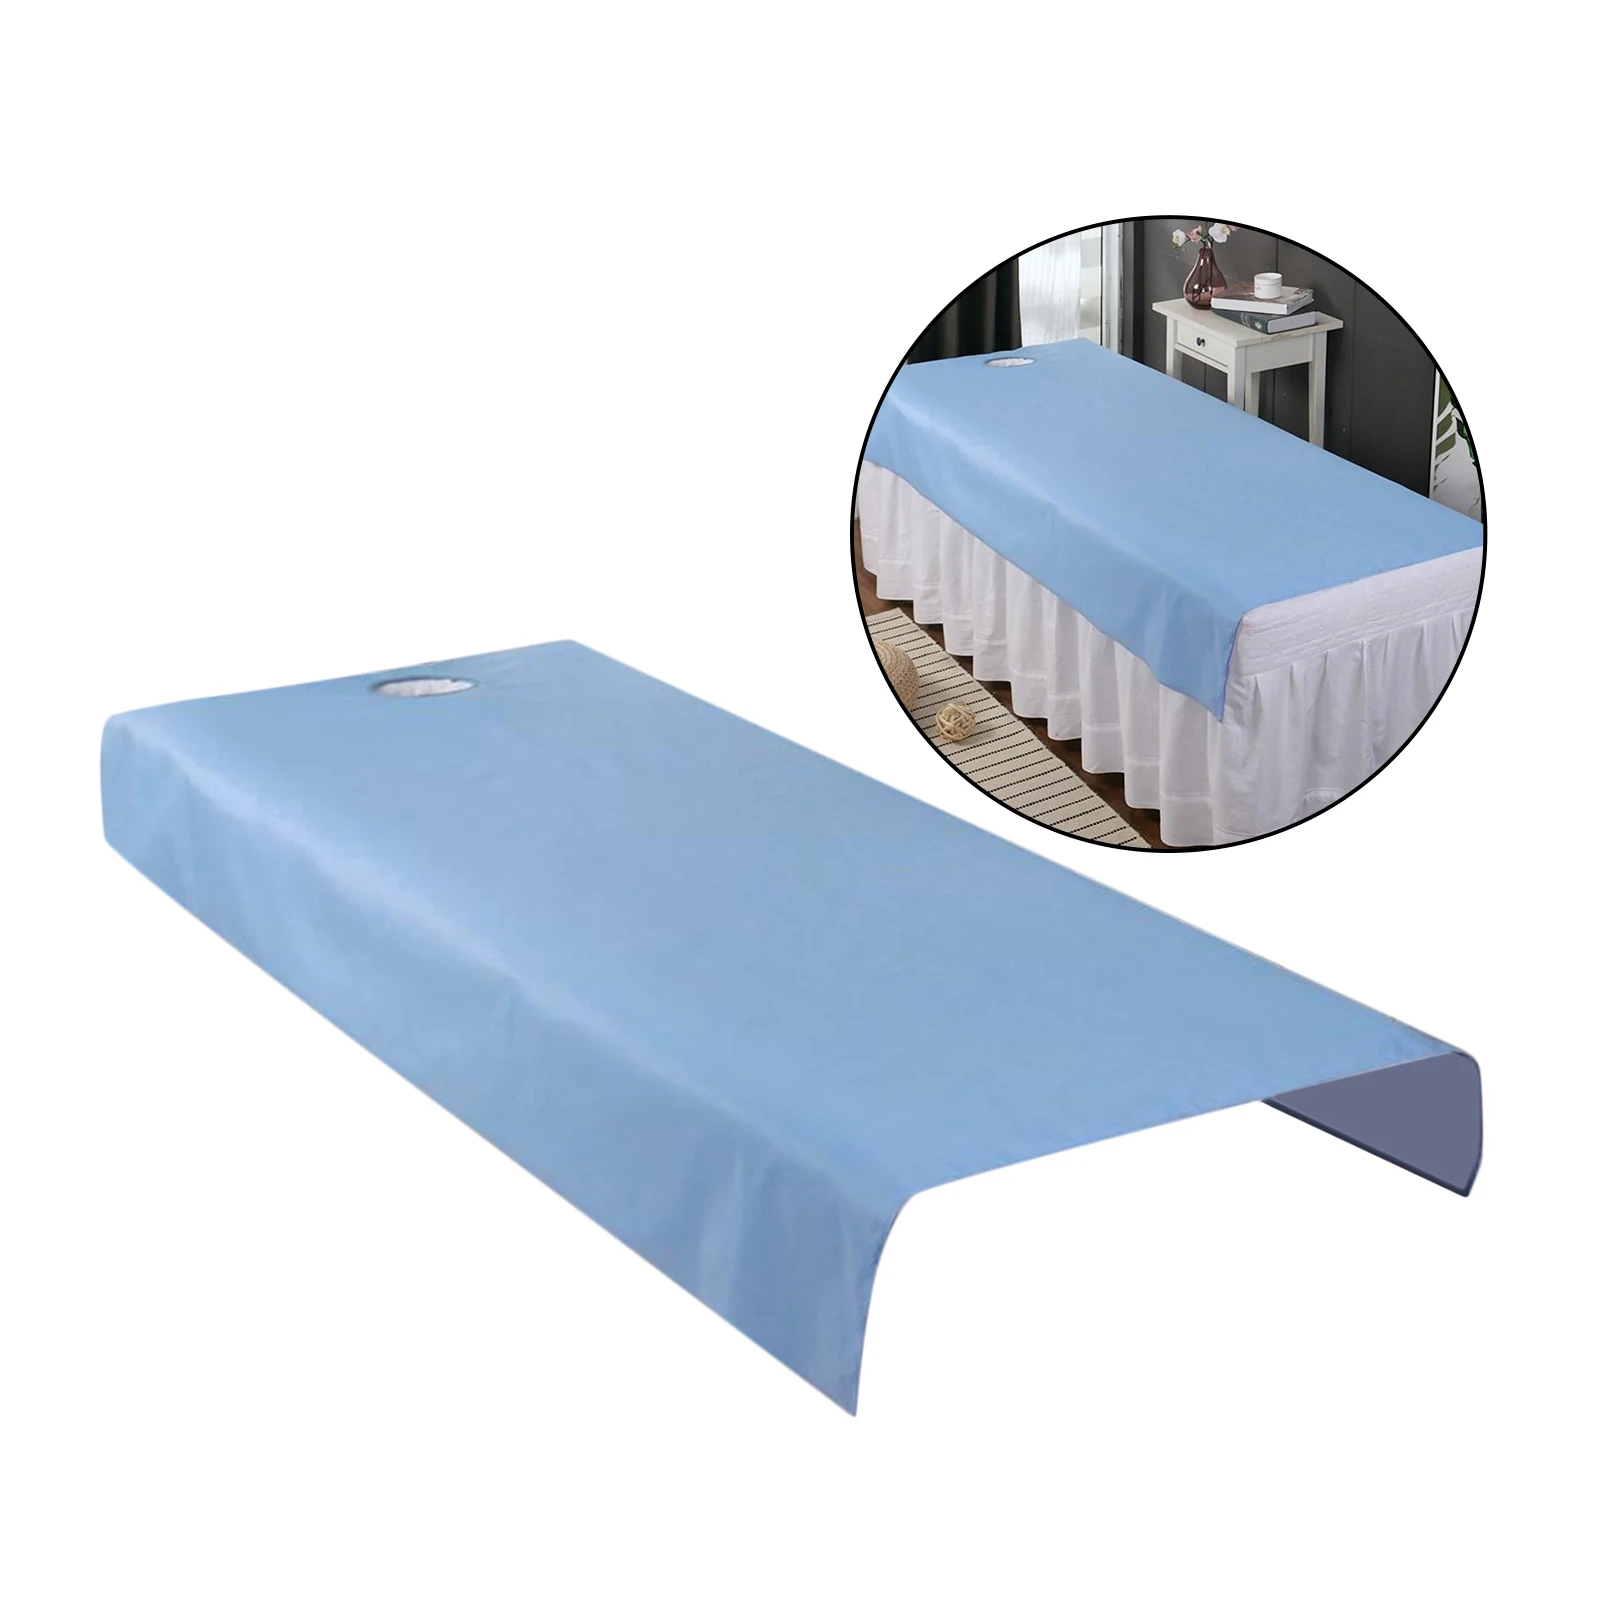 Beauty Massage Bed Sheets with Hole, Waterproof and Anti-oil Soft Salon Spa Bed Cover Protector